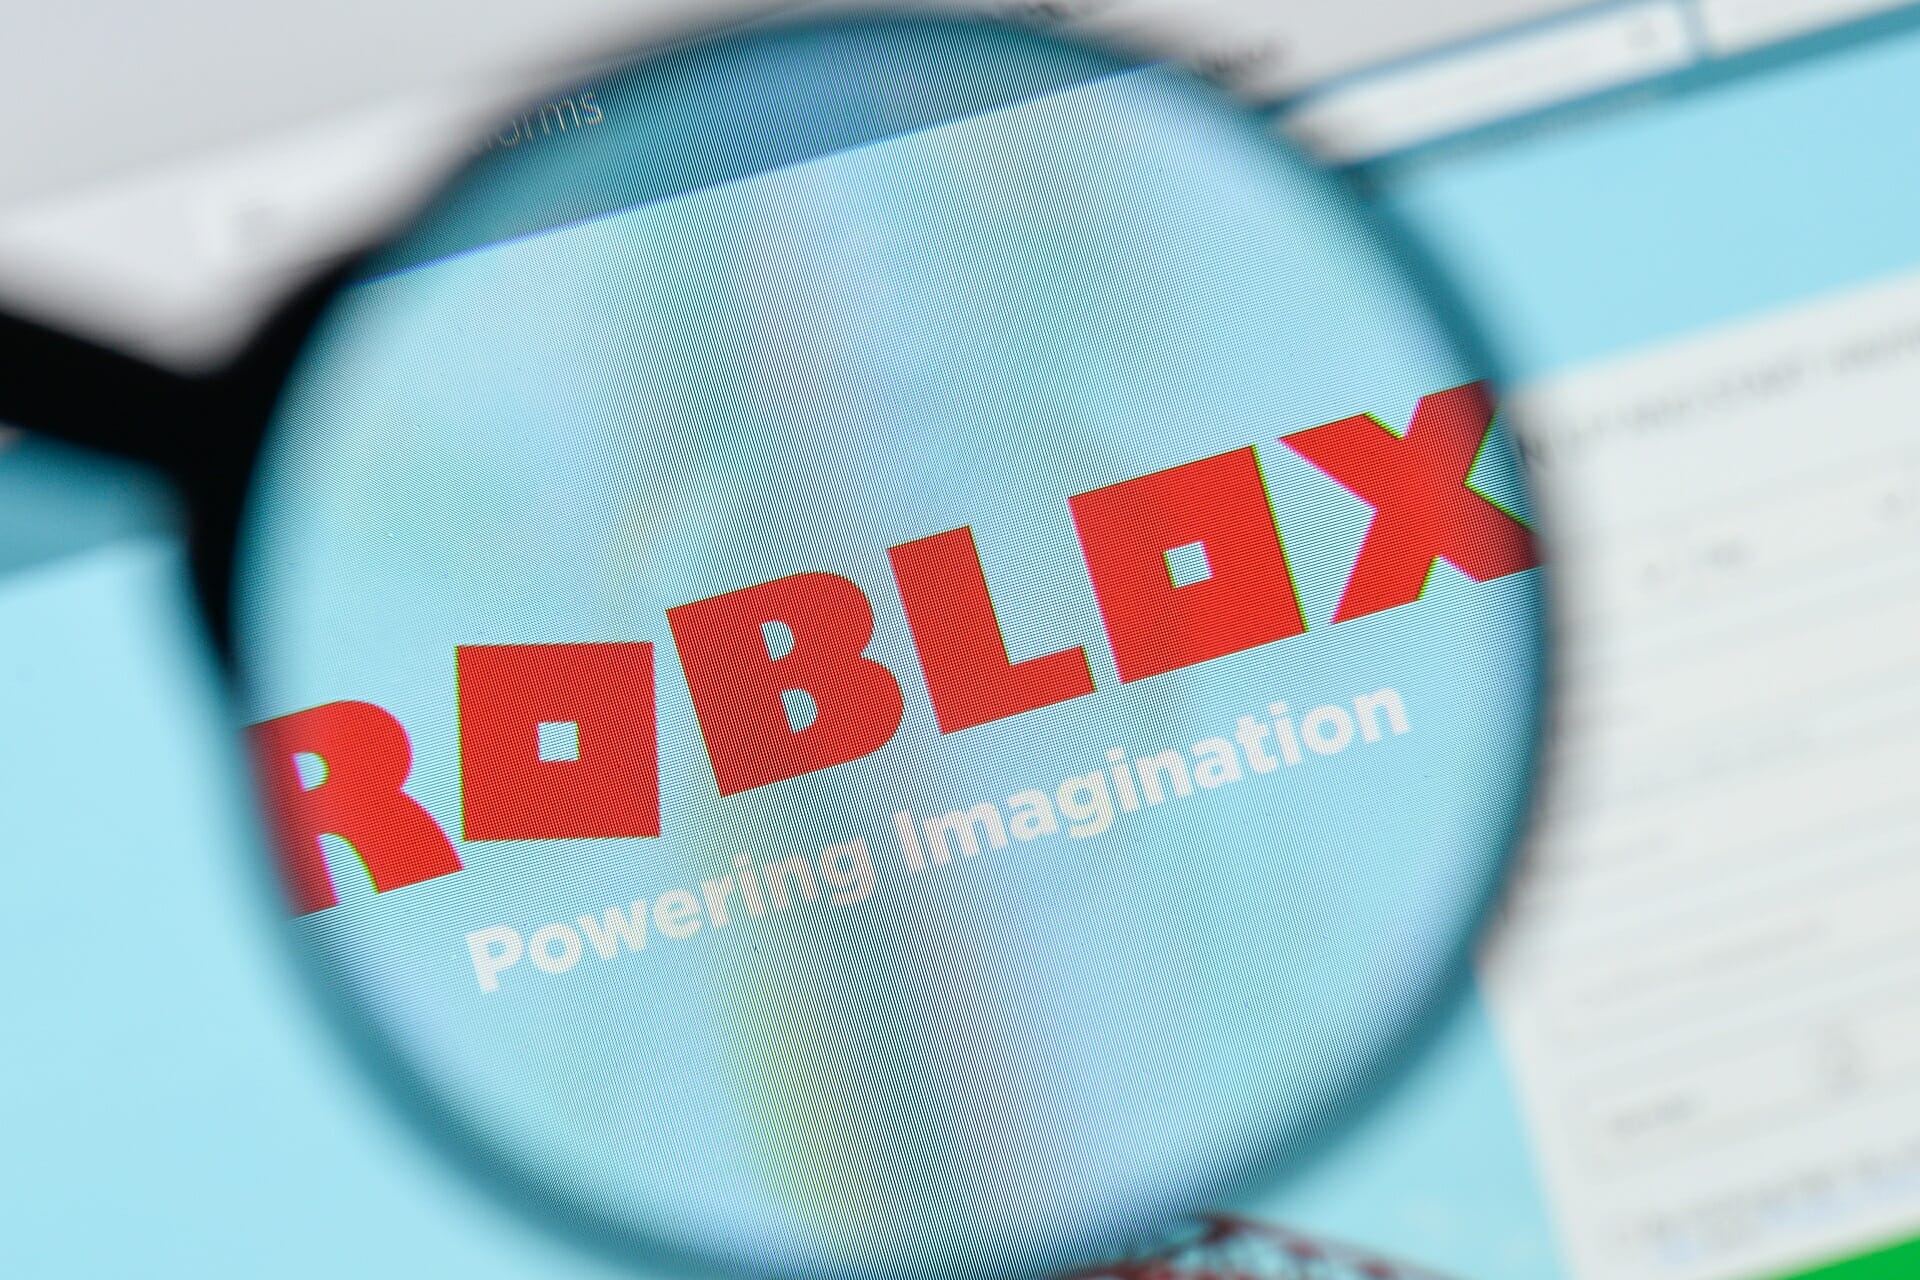 Your browser is not supported Roblox